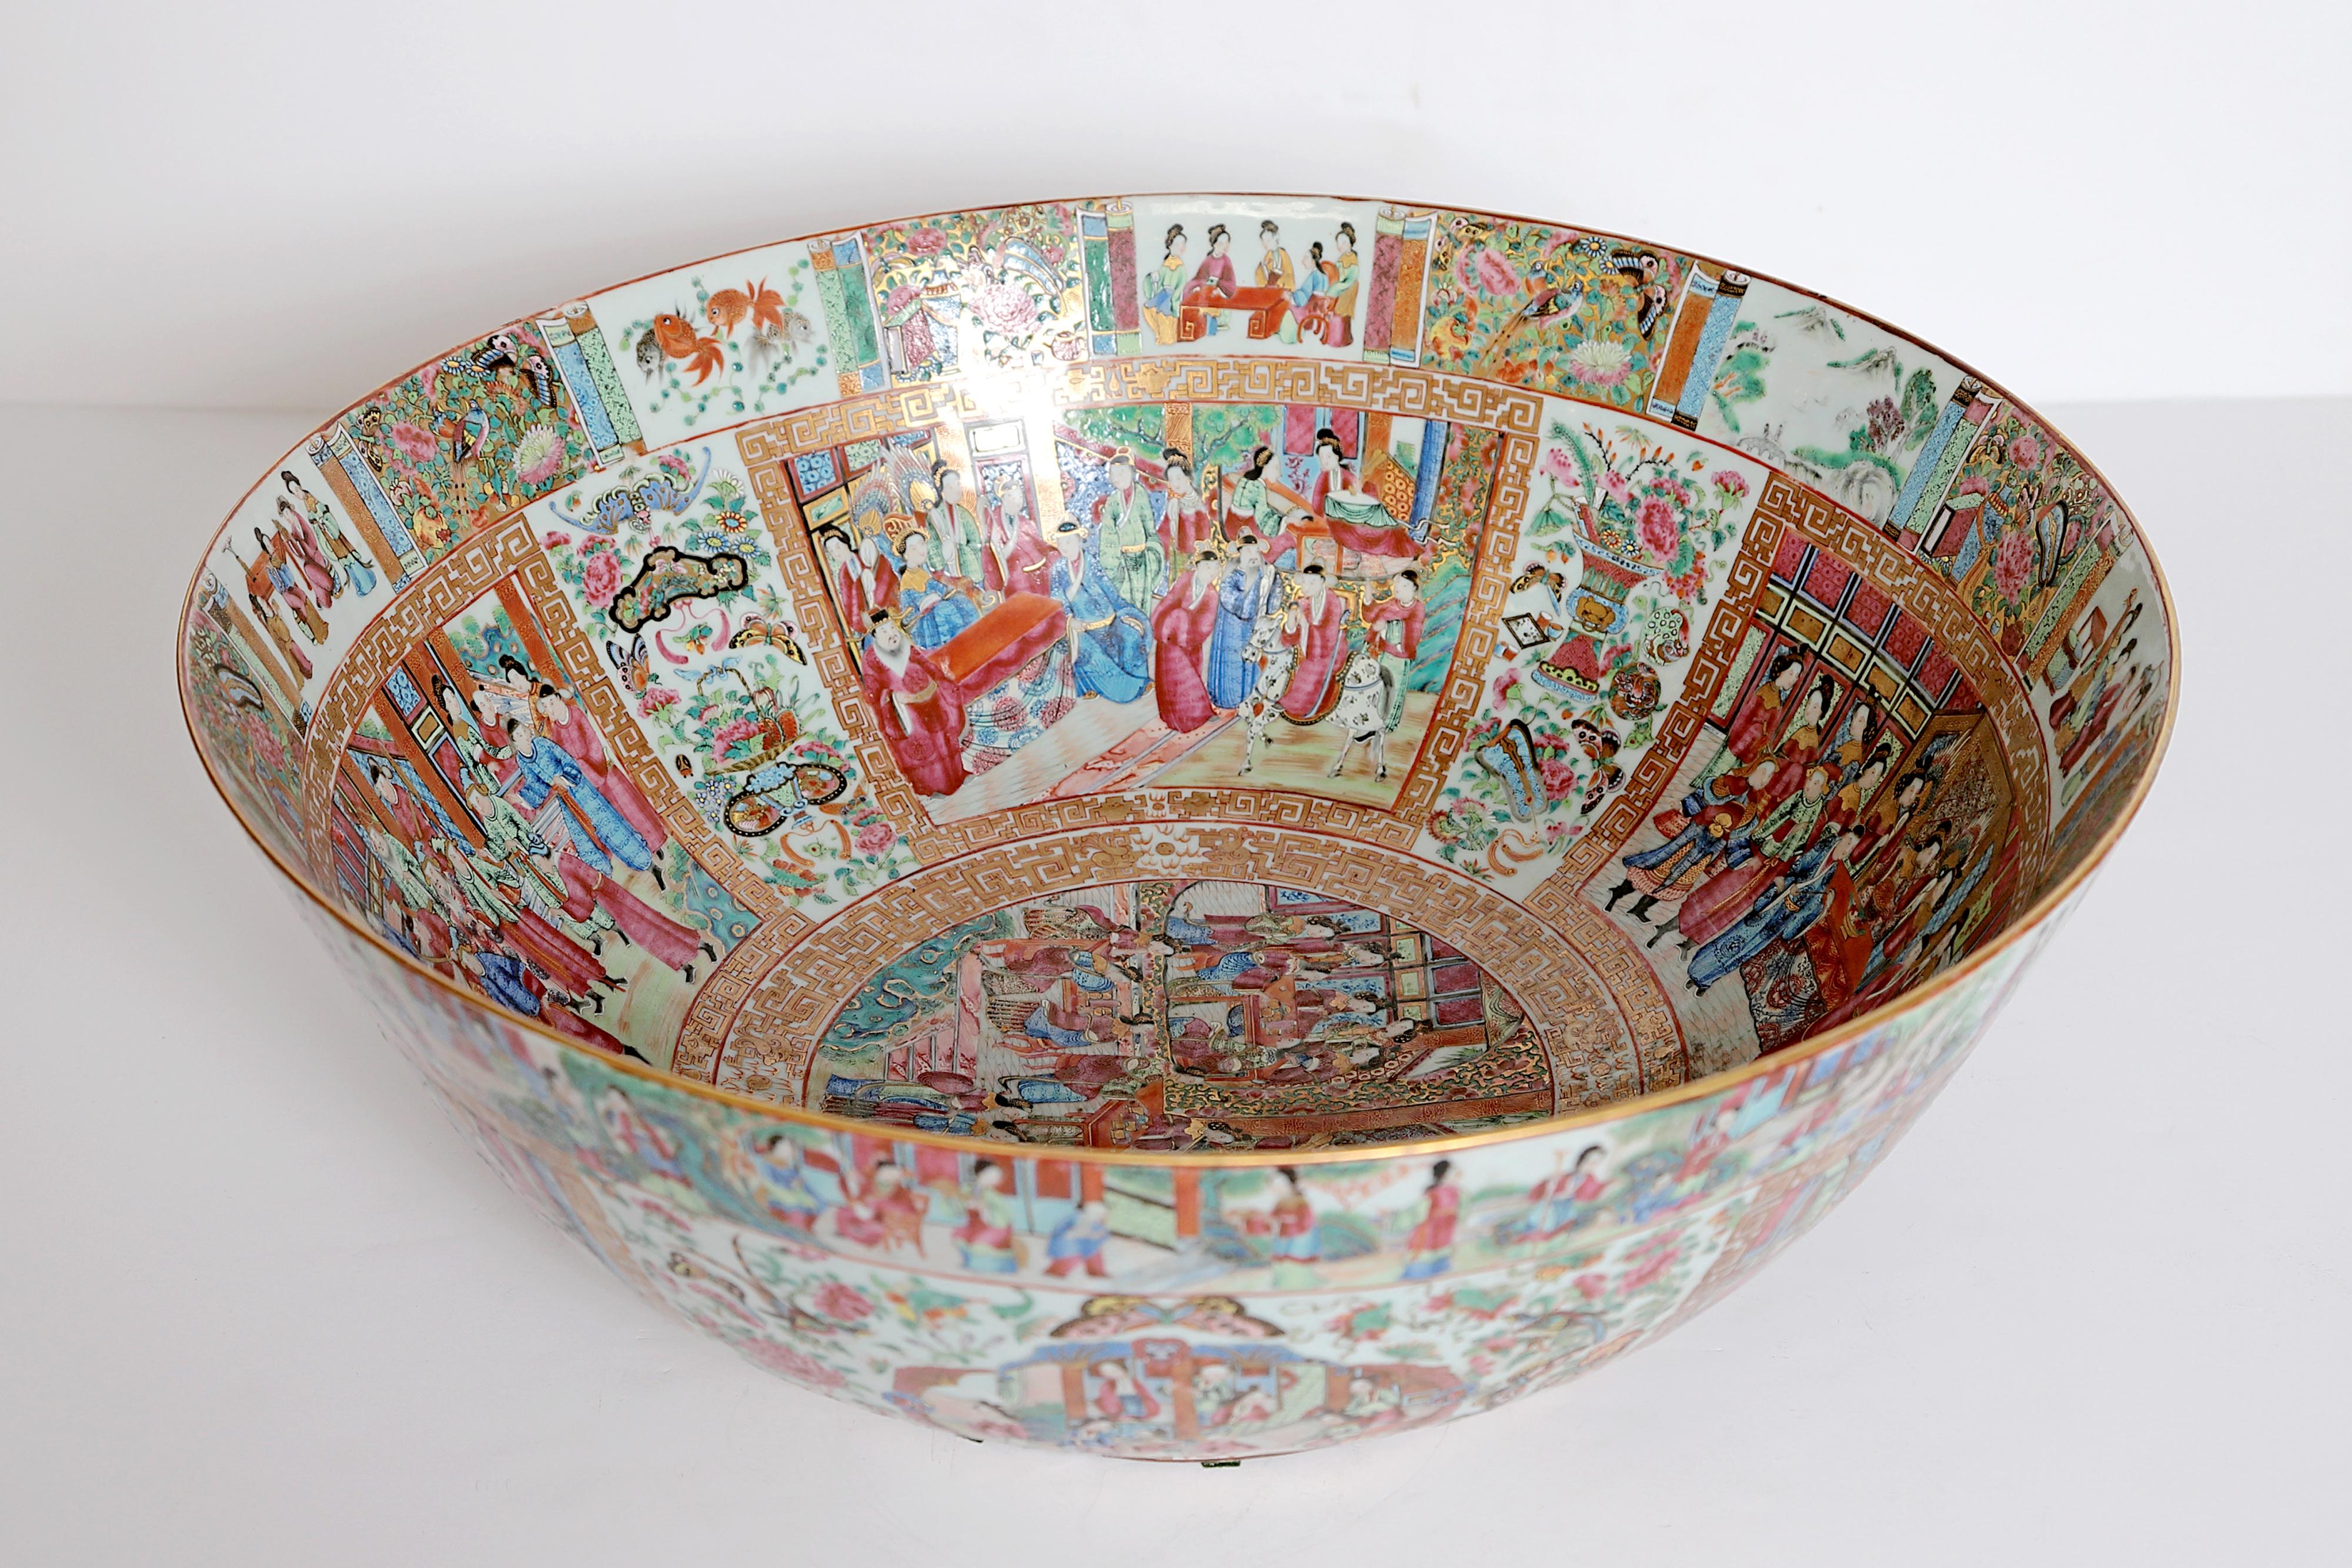 Large Scale Punch Bowl / Chinese Export Rose Medallion 7